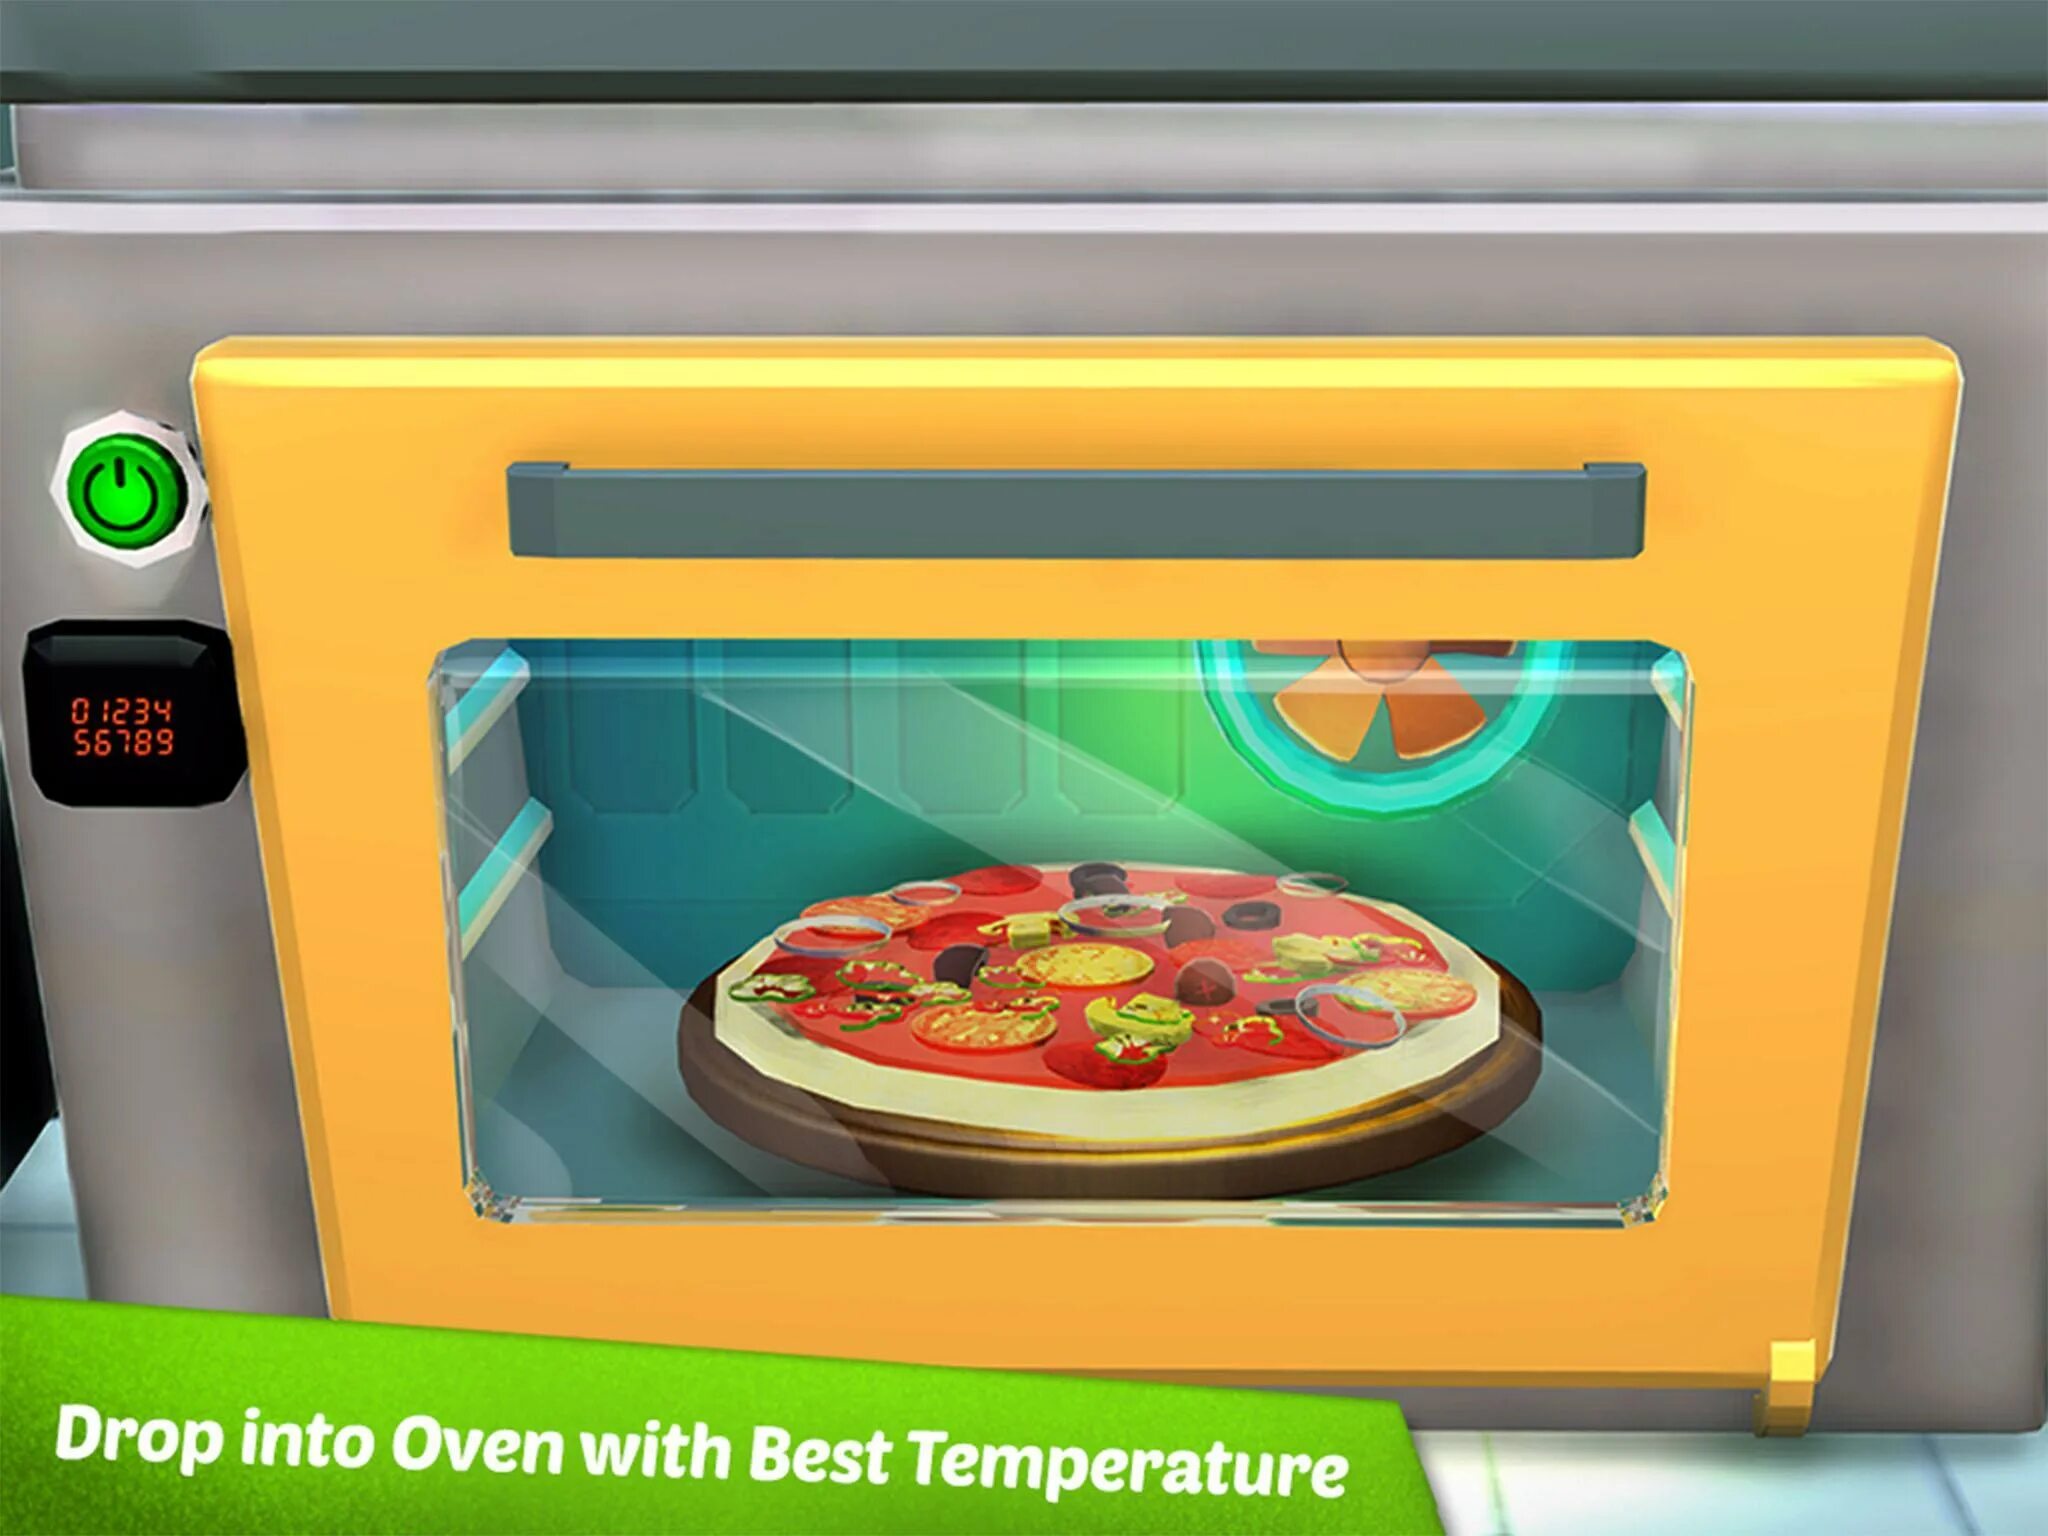 Pizza ready мод много. Pizza maker 3d: Cooking game. Пицца мейкер студент. Pizza games: pizza maker.